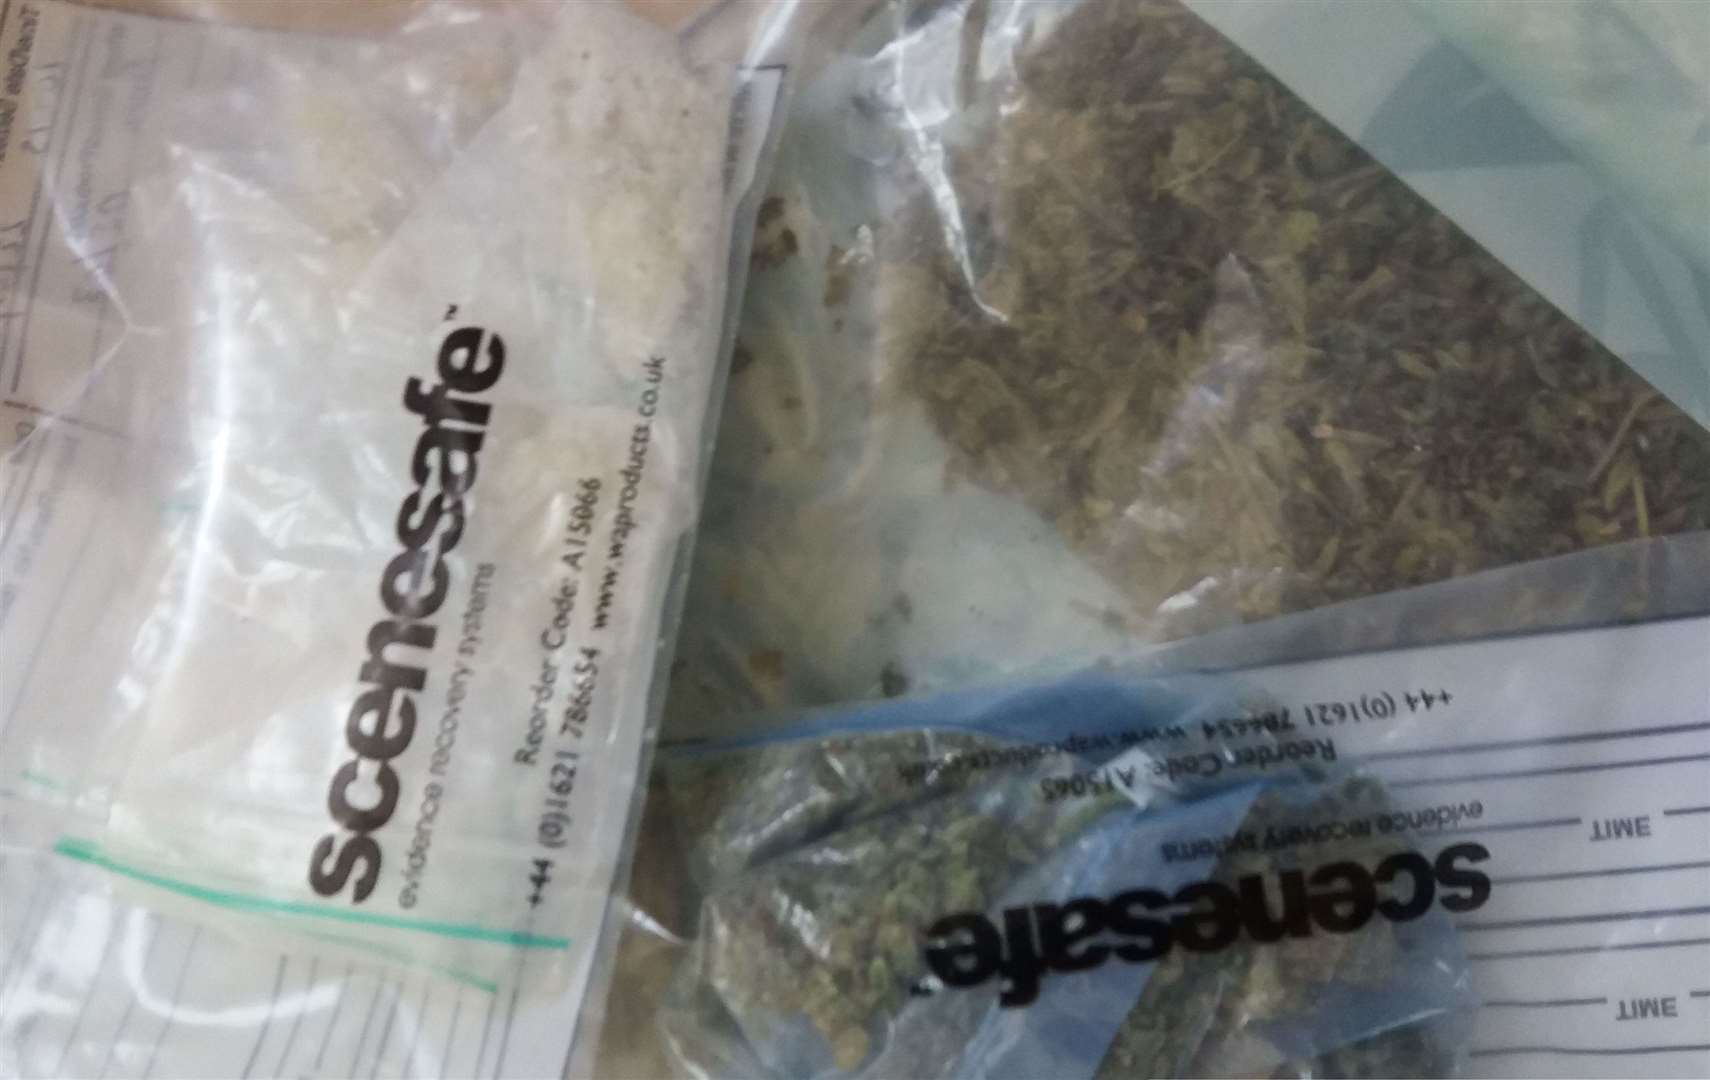 Some of the drugs seized from the Chestfield property. Picture: Kent Police